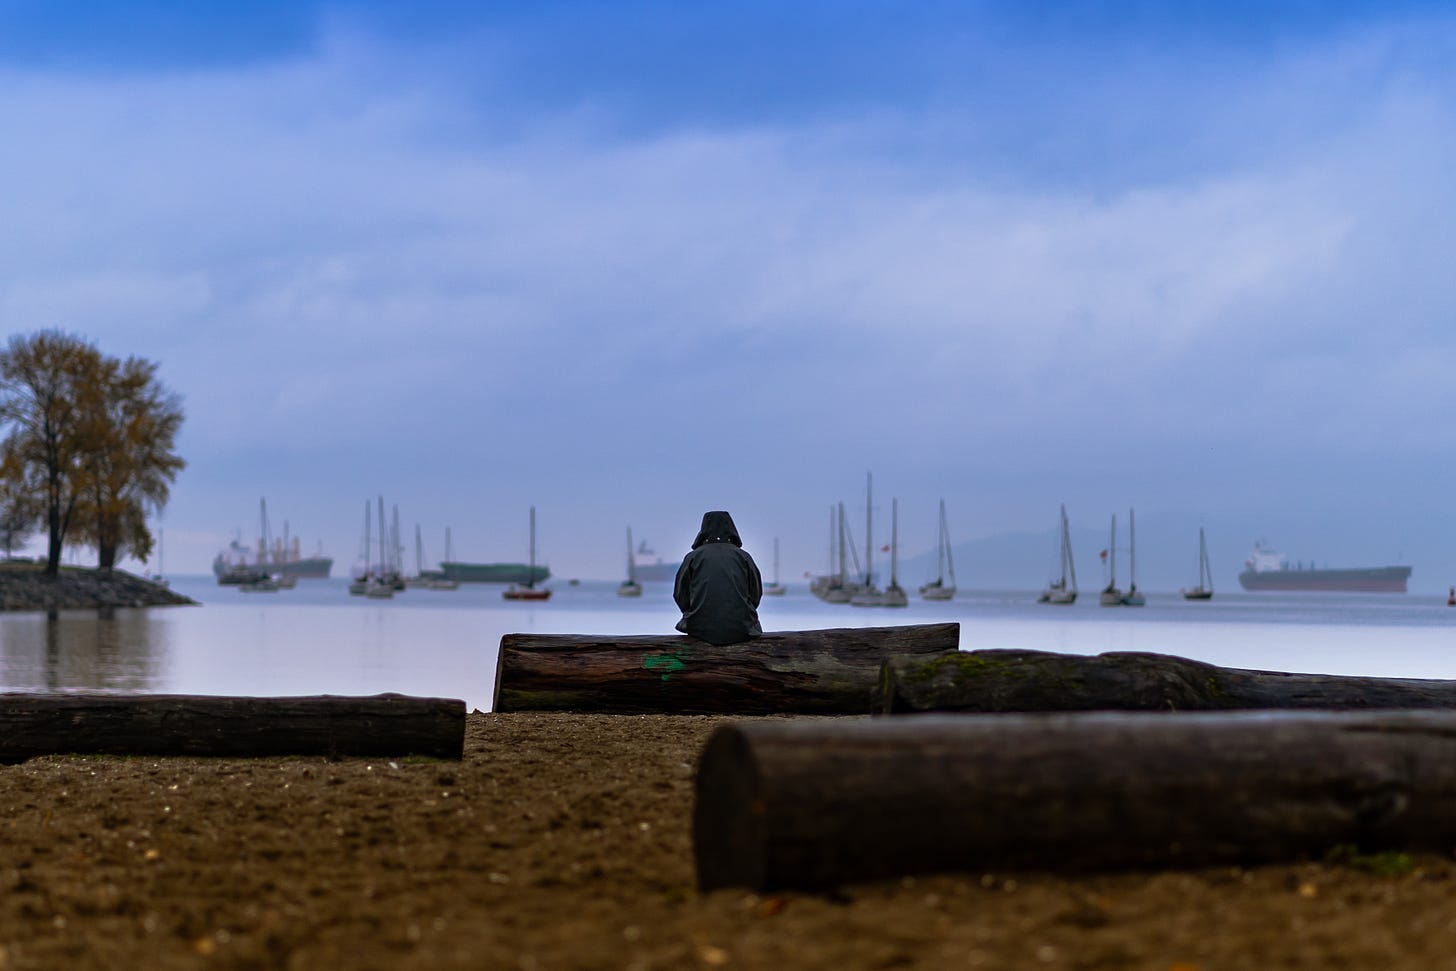 A person sitting on a wooden log looking out into a harbor.